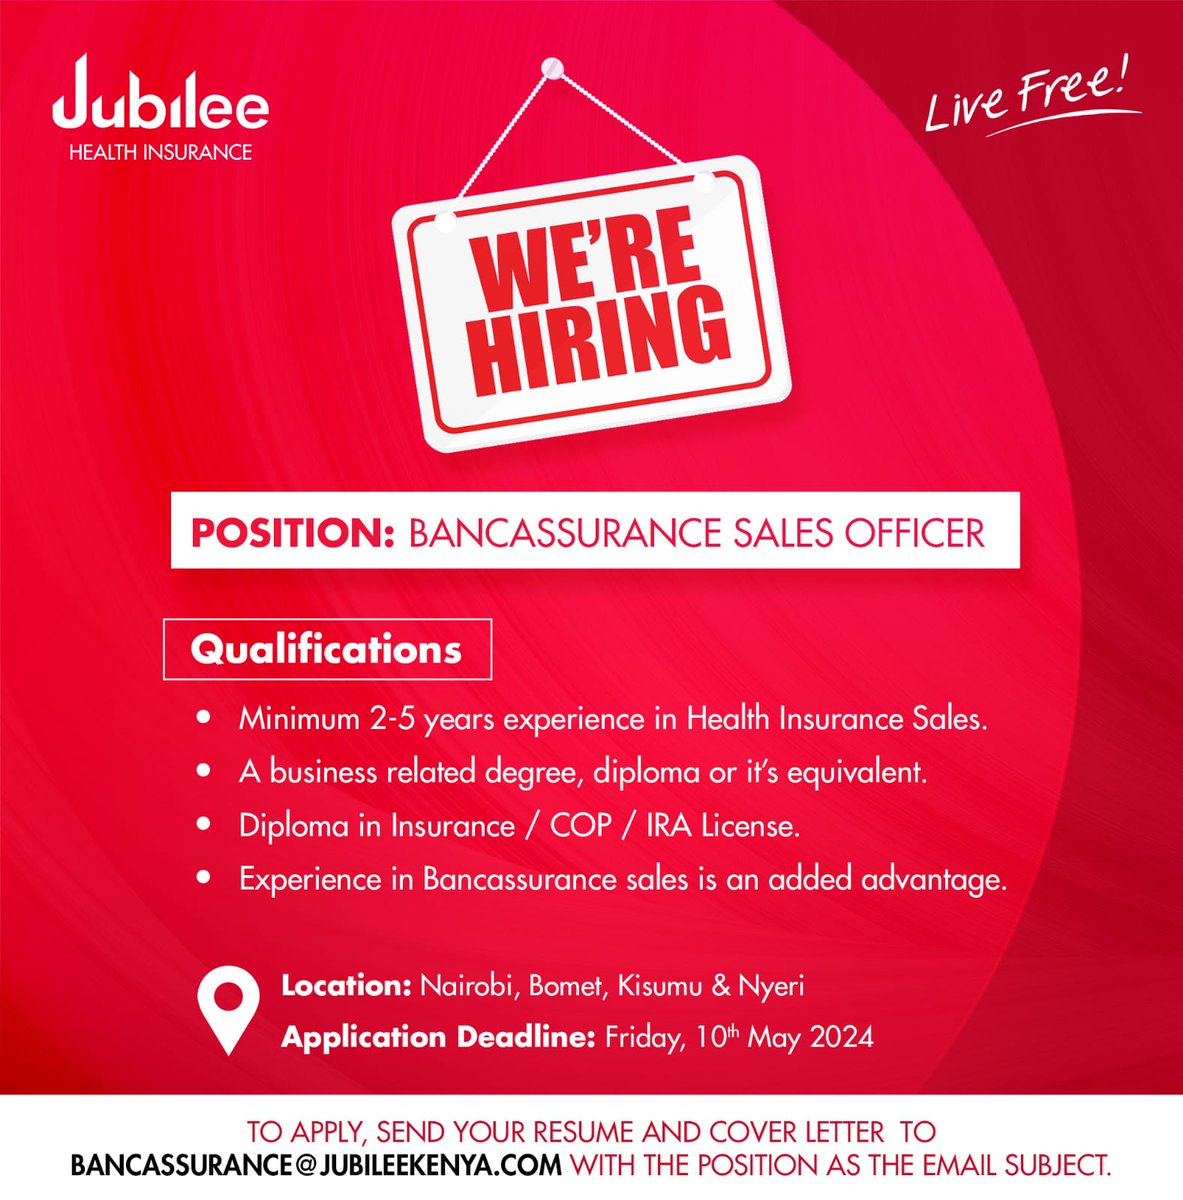 We're seeking dynamic individuals to join our Bancassurance team.

If you're ready for a challenge and want to work with the top health insurer, this opportunity is for you.

Submit your resume by May 10th, 2024.

#JubileeHealth #IkoKazi